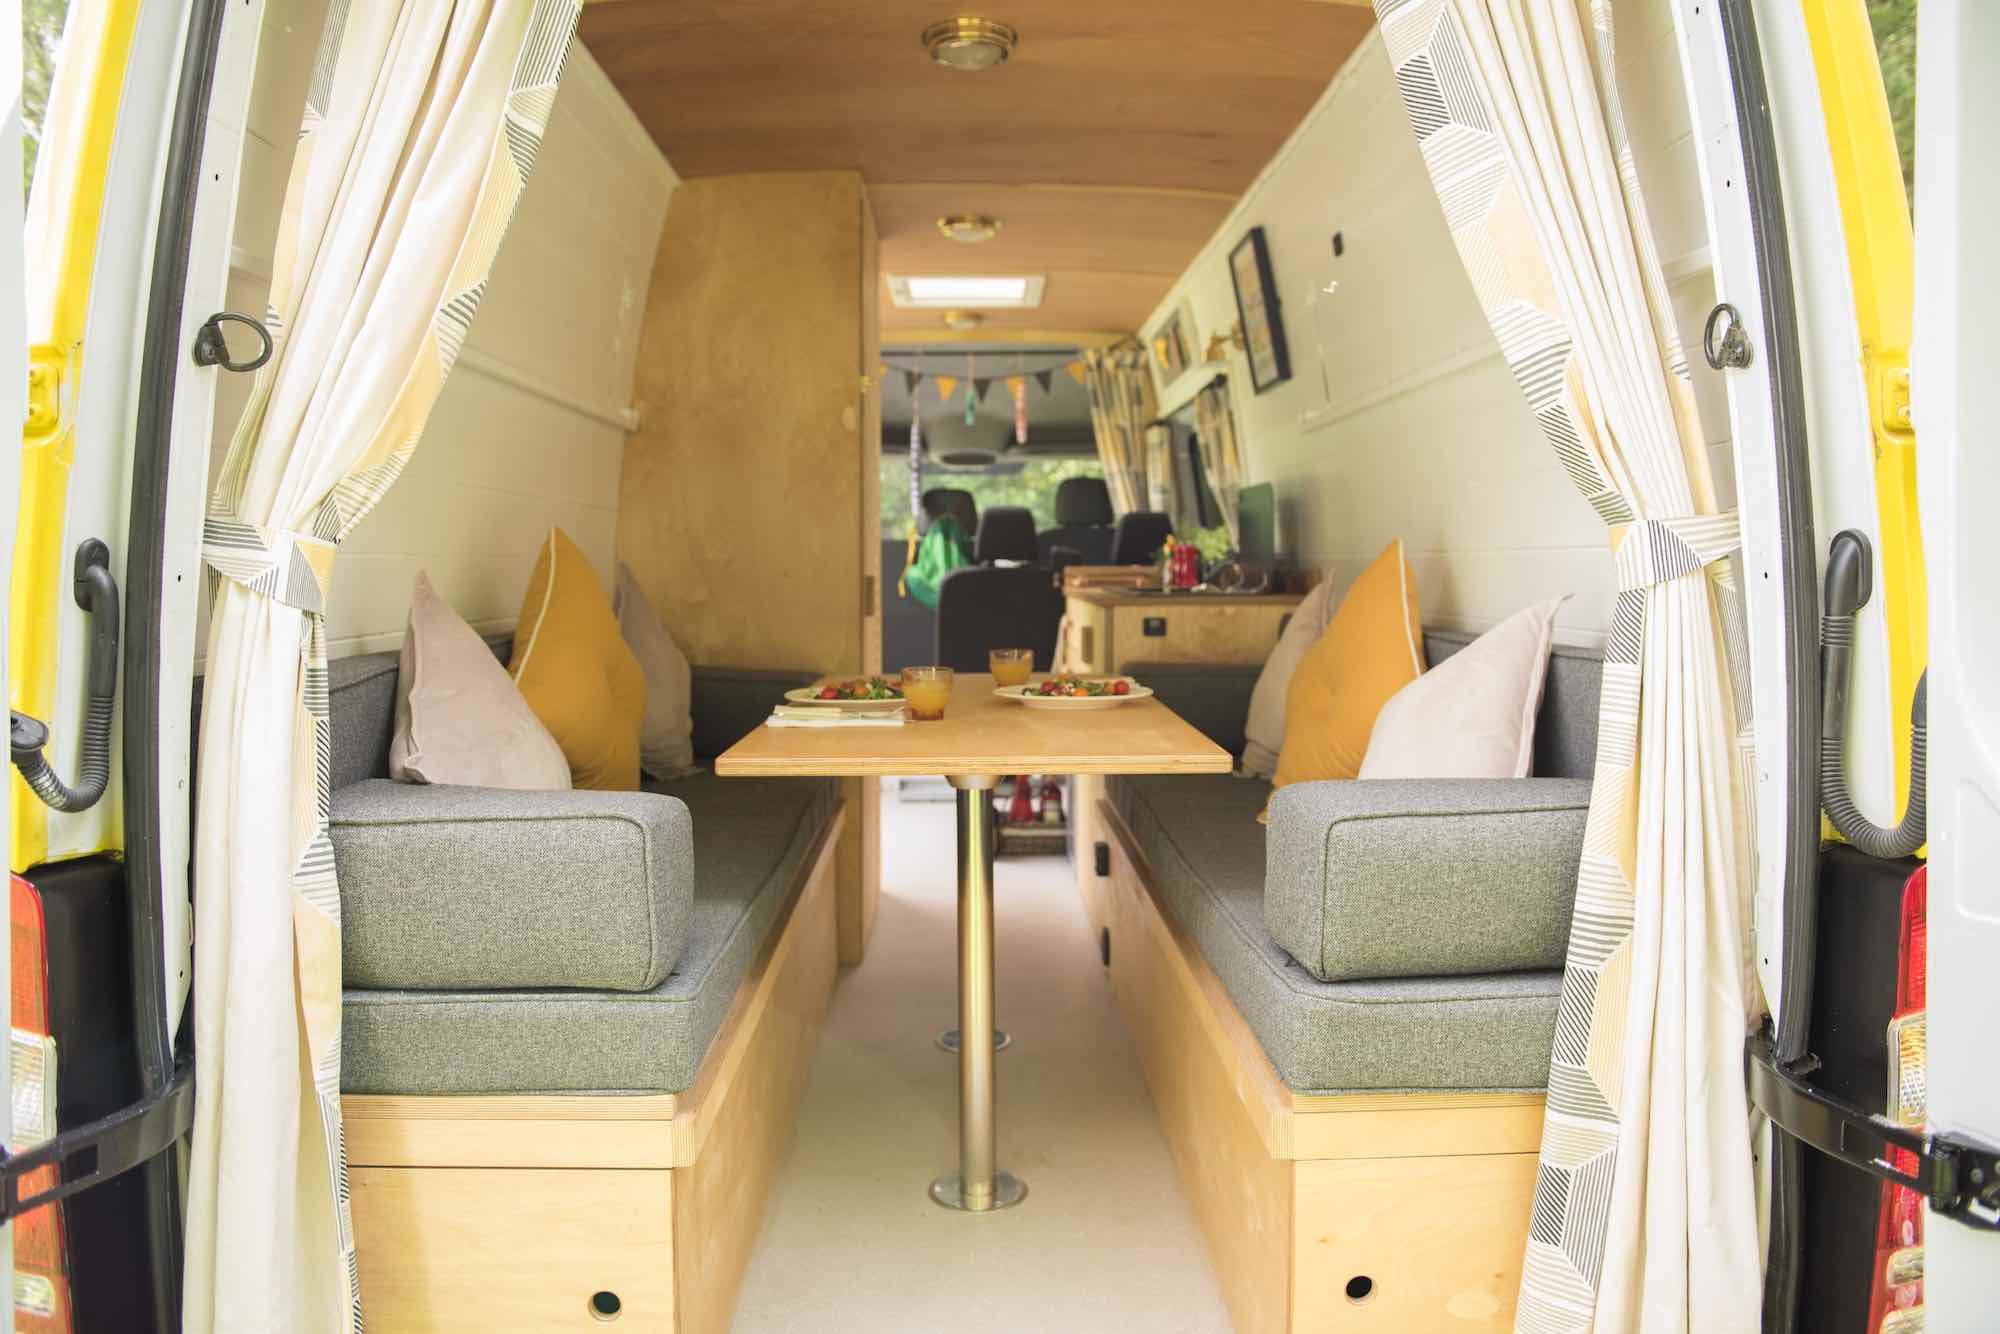 We take a look at adventurous campers who’ve gone above and beyond pimping their vans and created travelling homes that stay within legal boundaries.